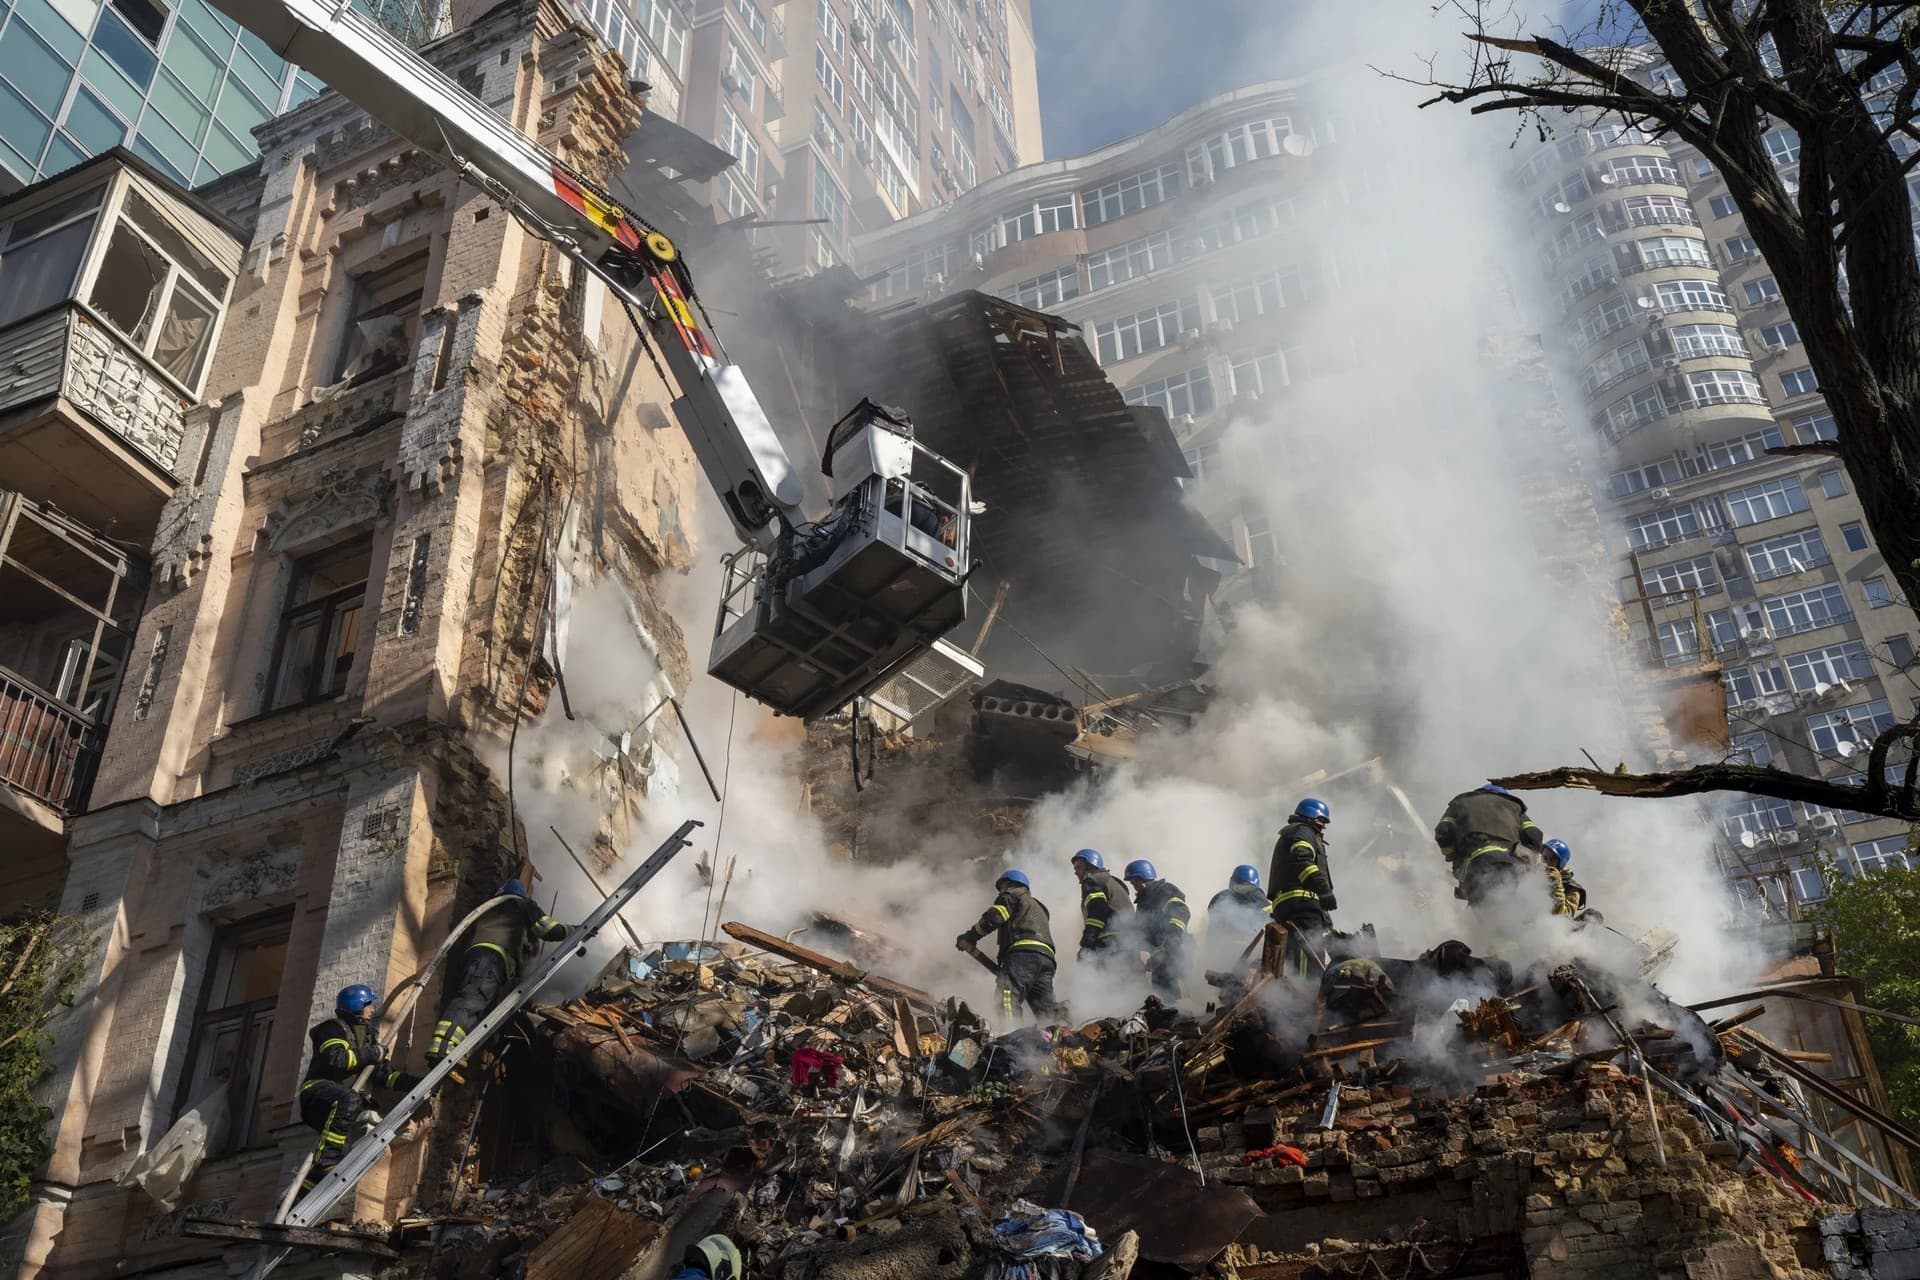 Firefighters work after a drone attack on buildings in Kyiv